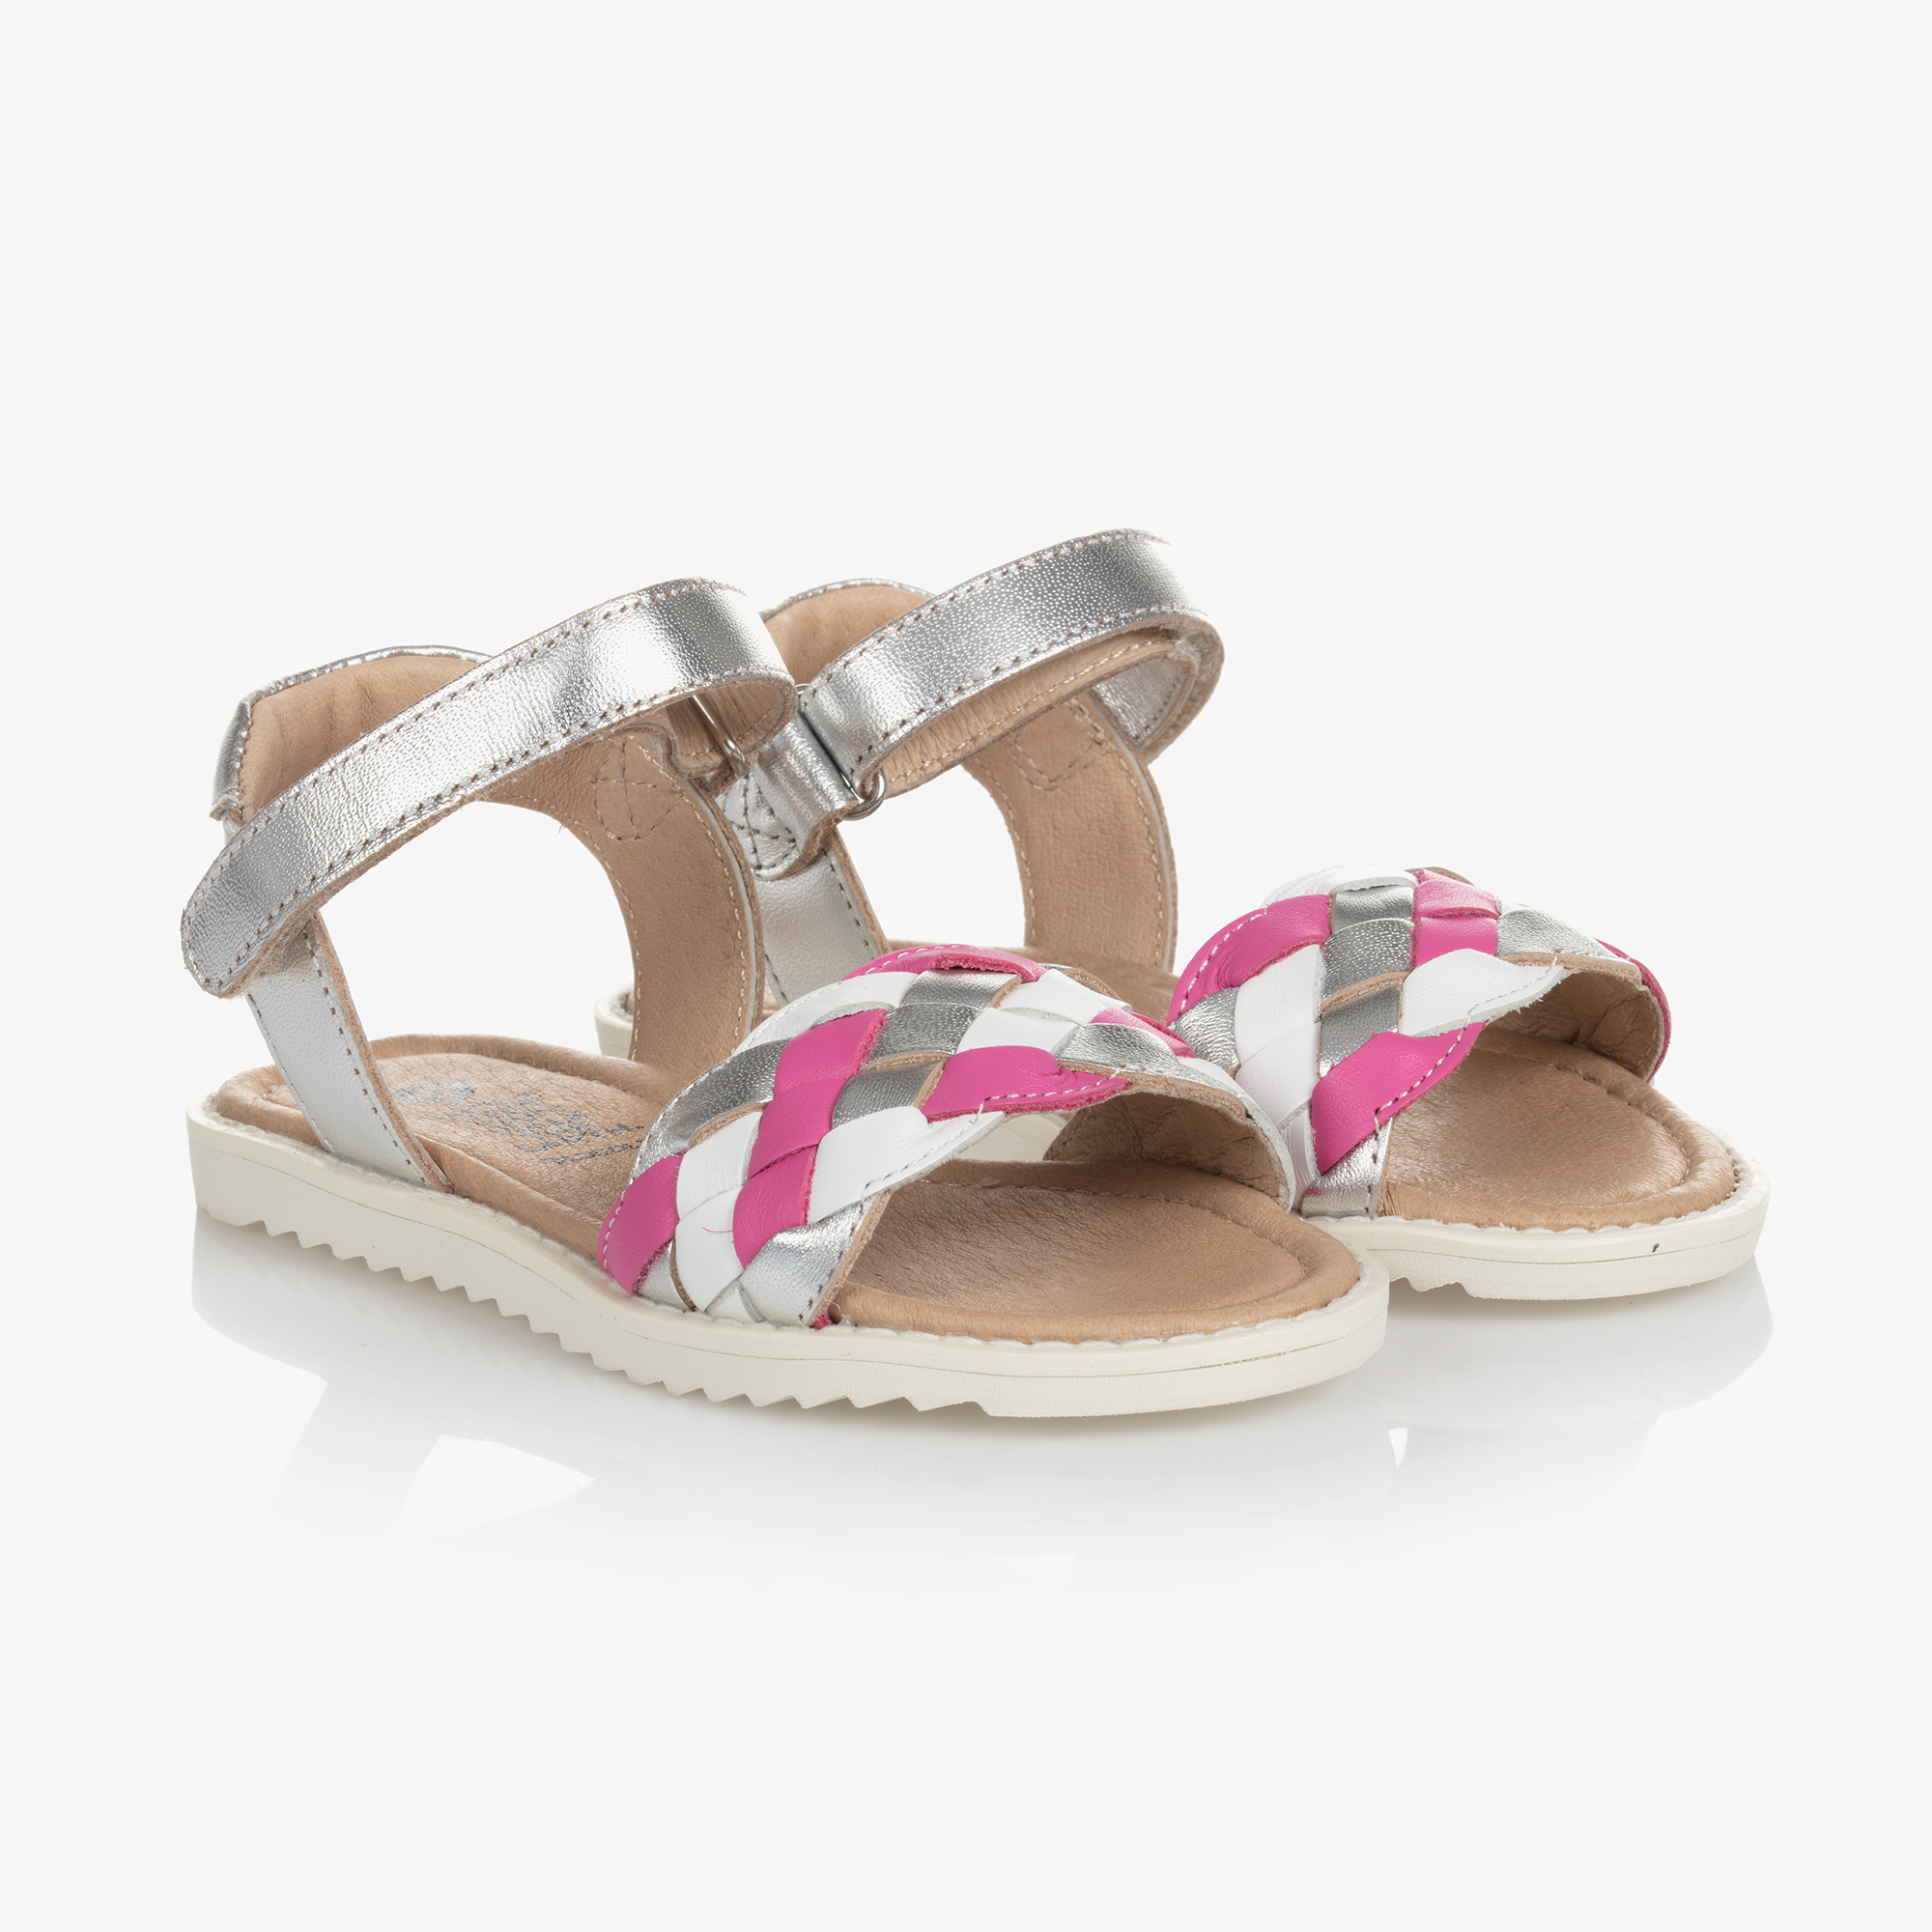 Old Soles - Silver Leather Sandals | Childrensalon